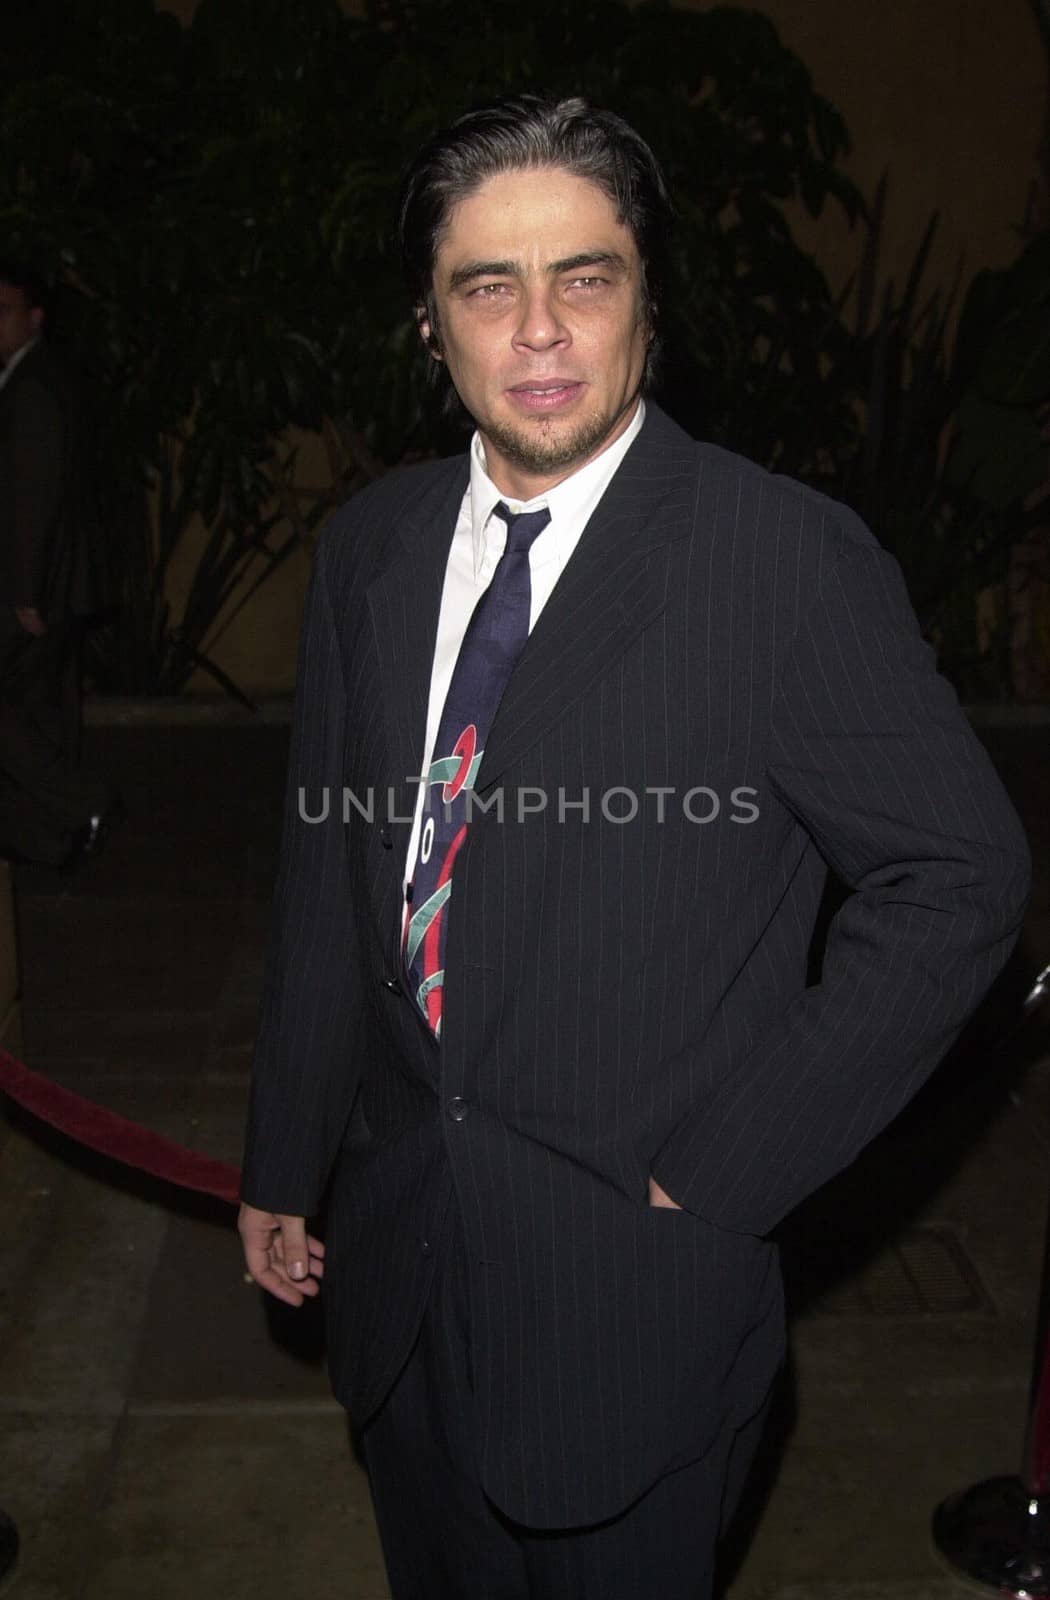 Benecio Del Torro at the premiere of The Way Of The Gun in Hollywood. 08-29-00